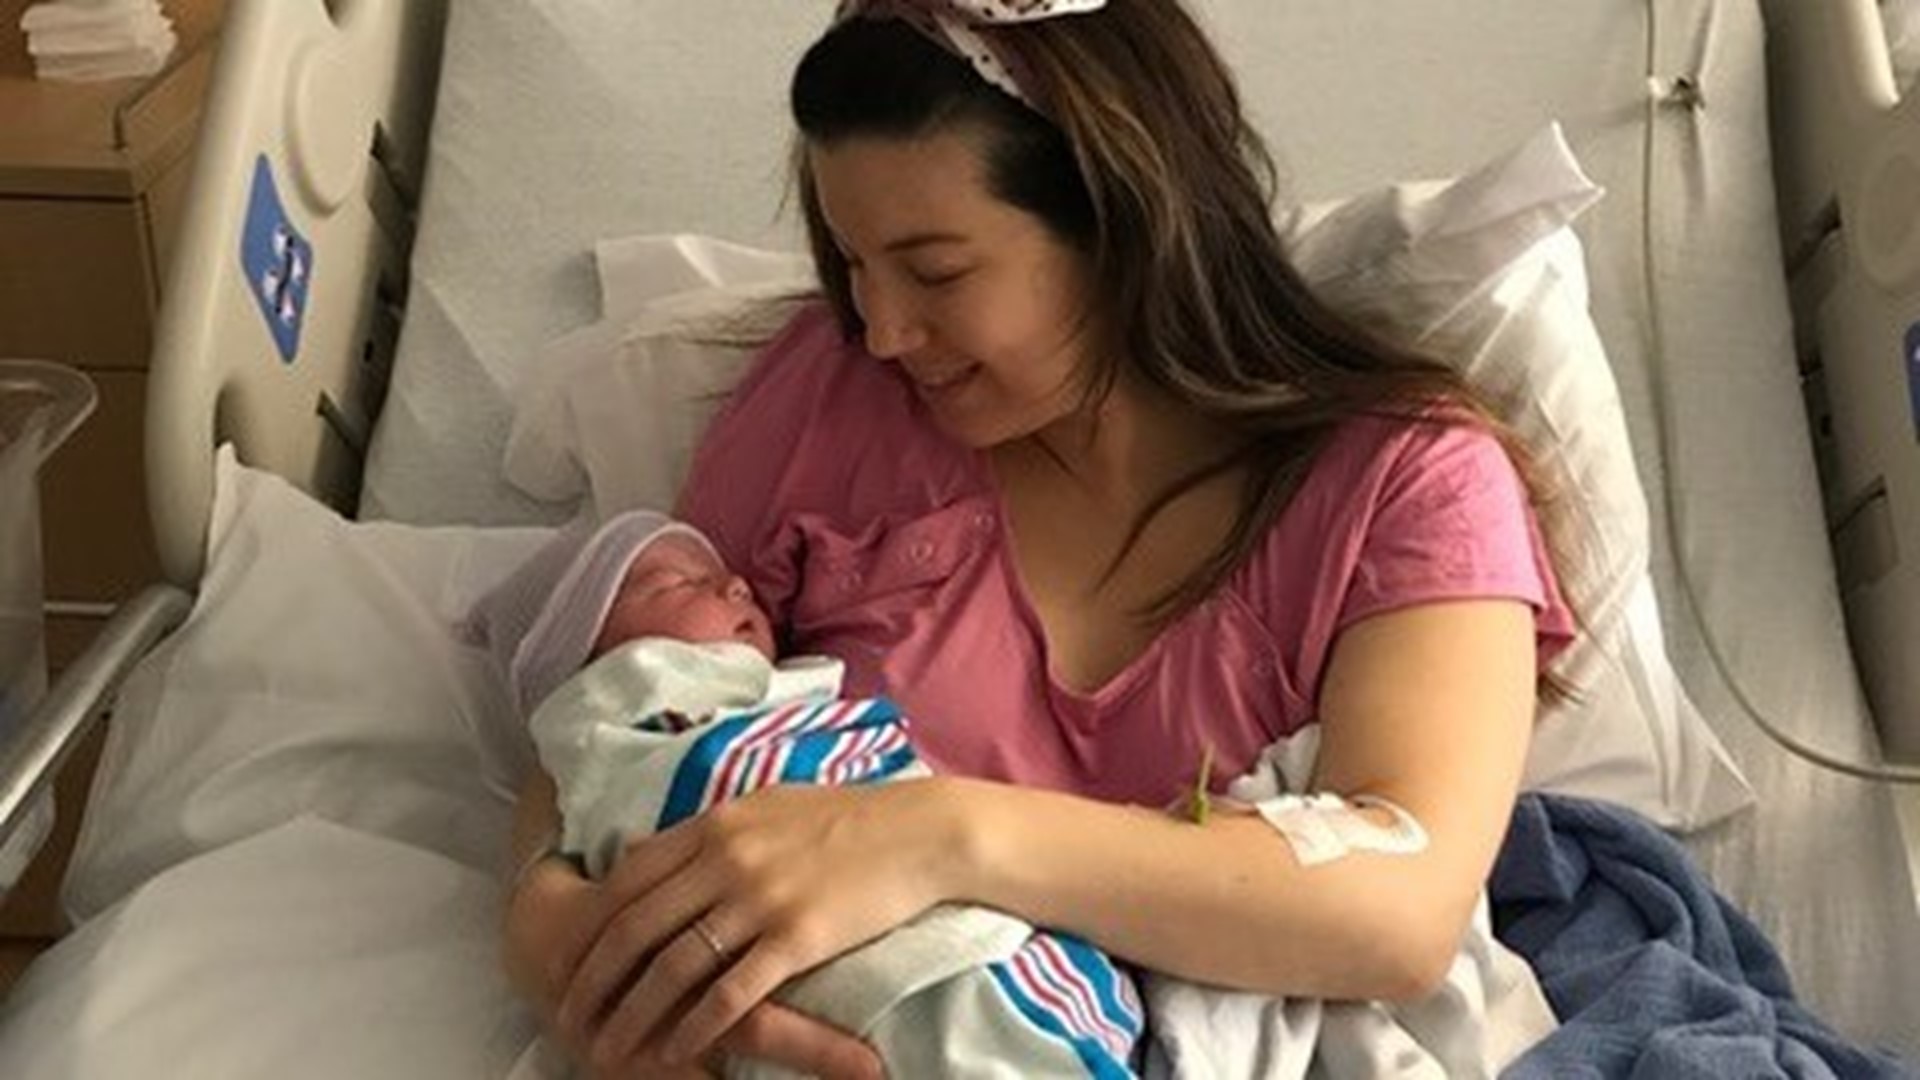 With two run-in helpers and a parking lot centered in the story, it’s safe to say that Madison Fritter’s second birth was a little bit different than her first.